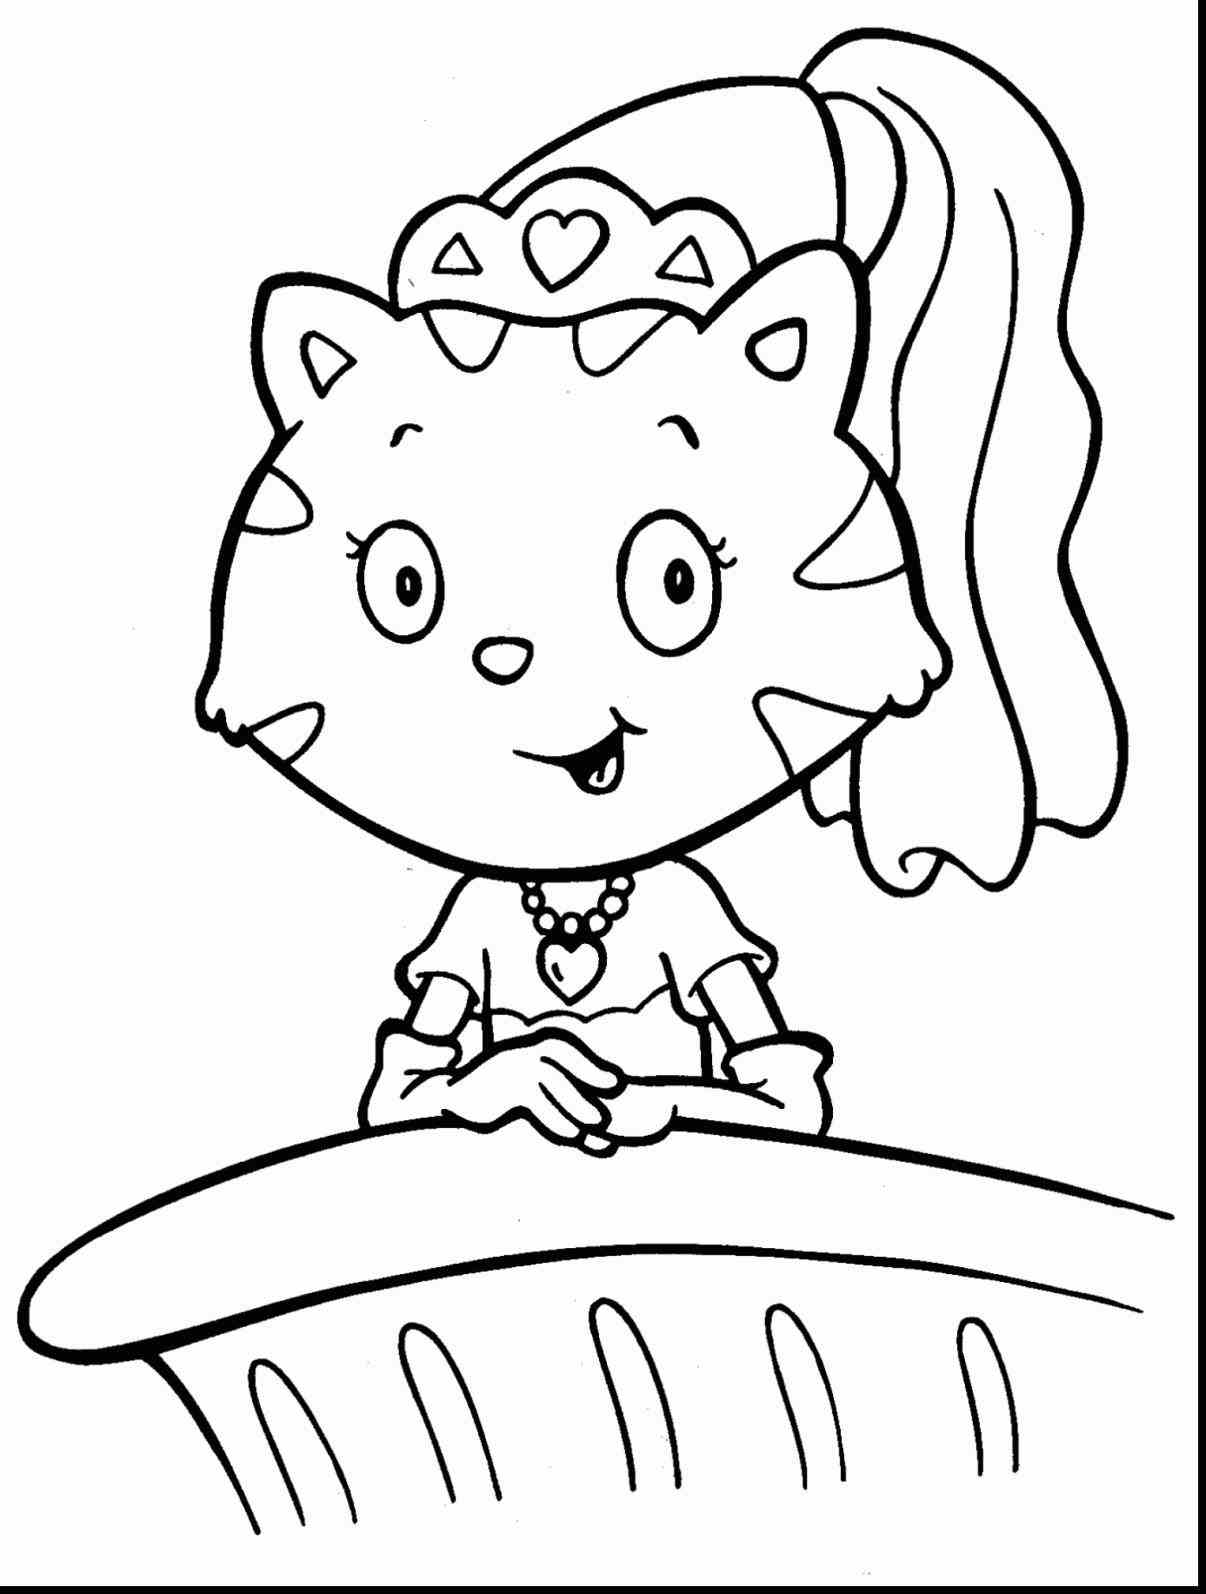 Litten Coloring Pages at GetColorings.com | Free printable colorings